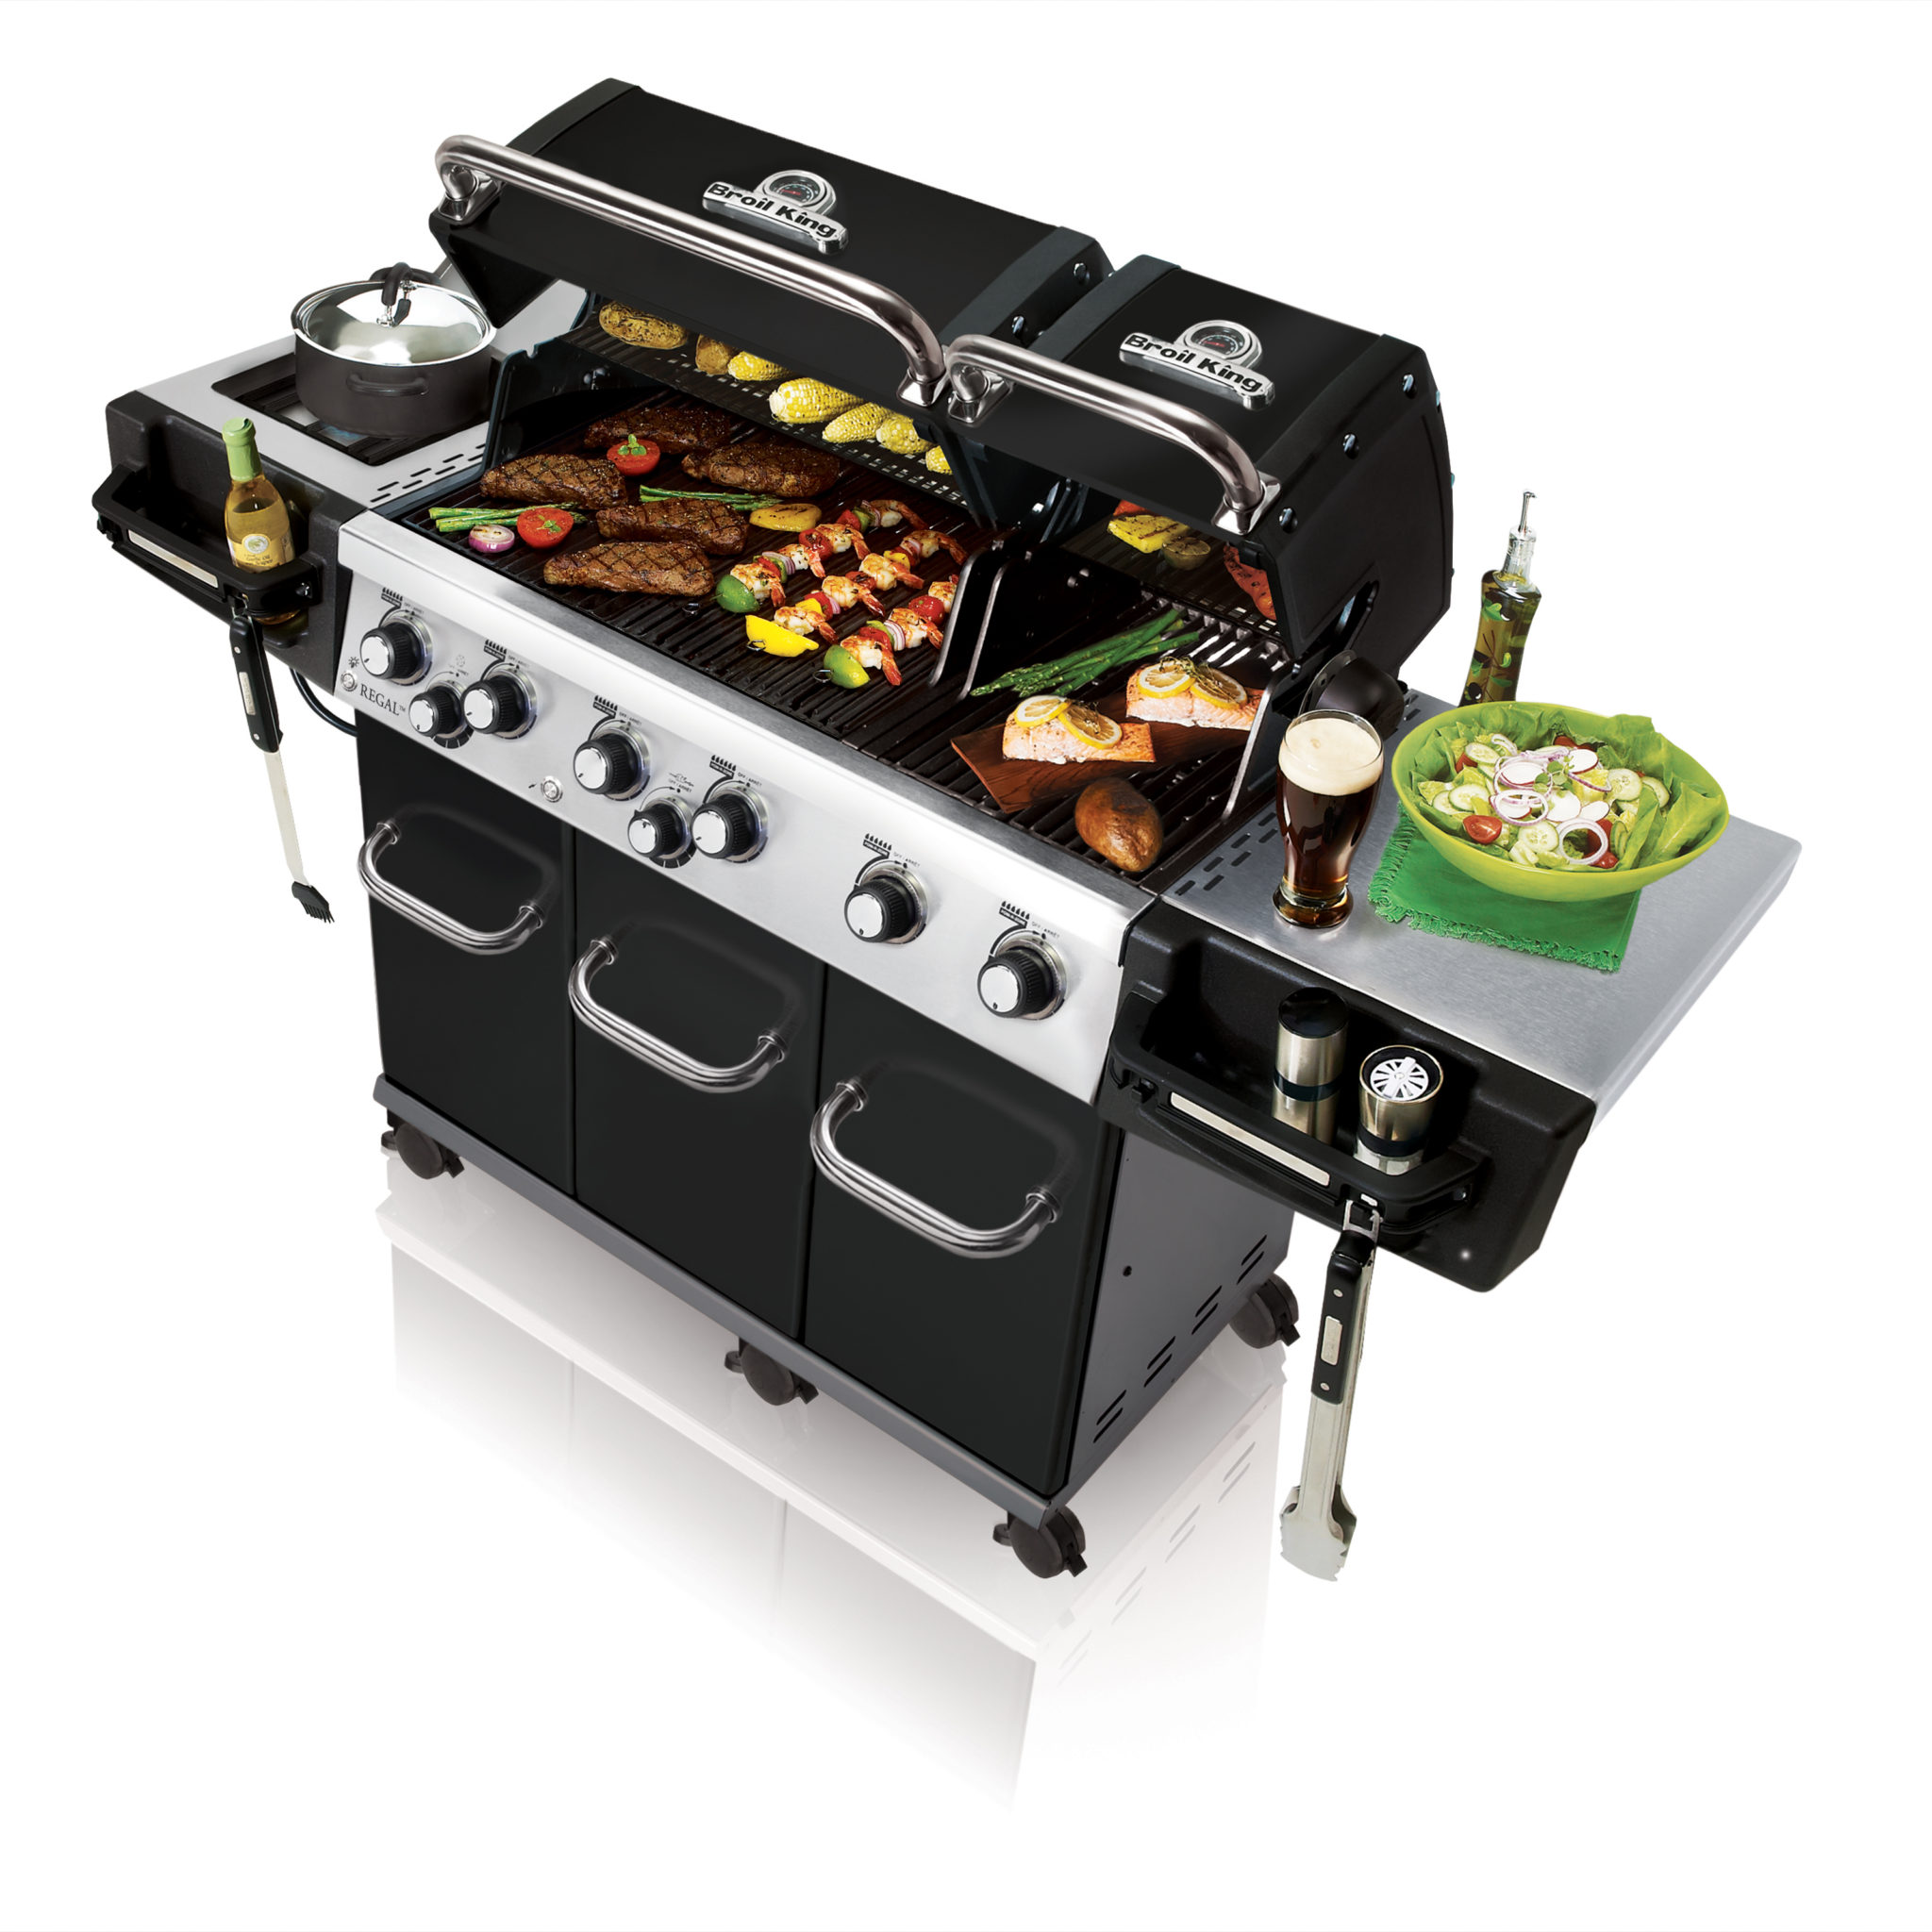 Barbecue Broil king- photo barbecue